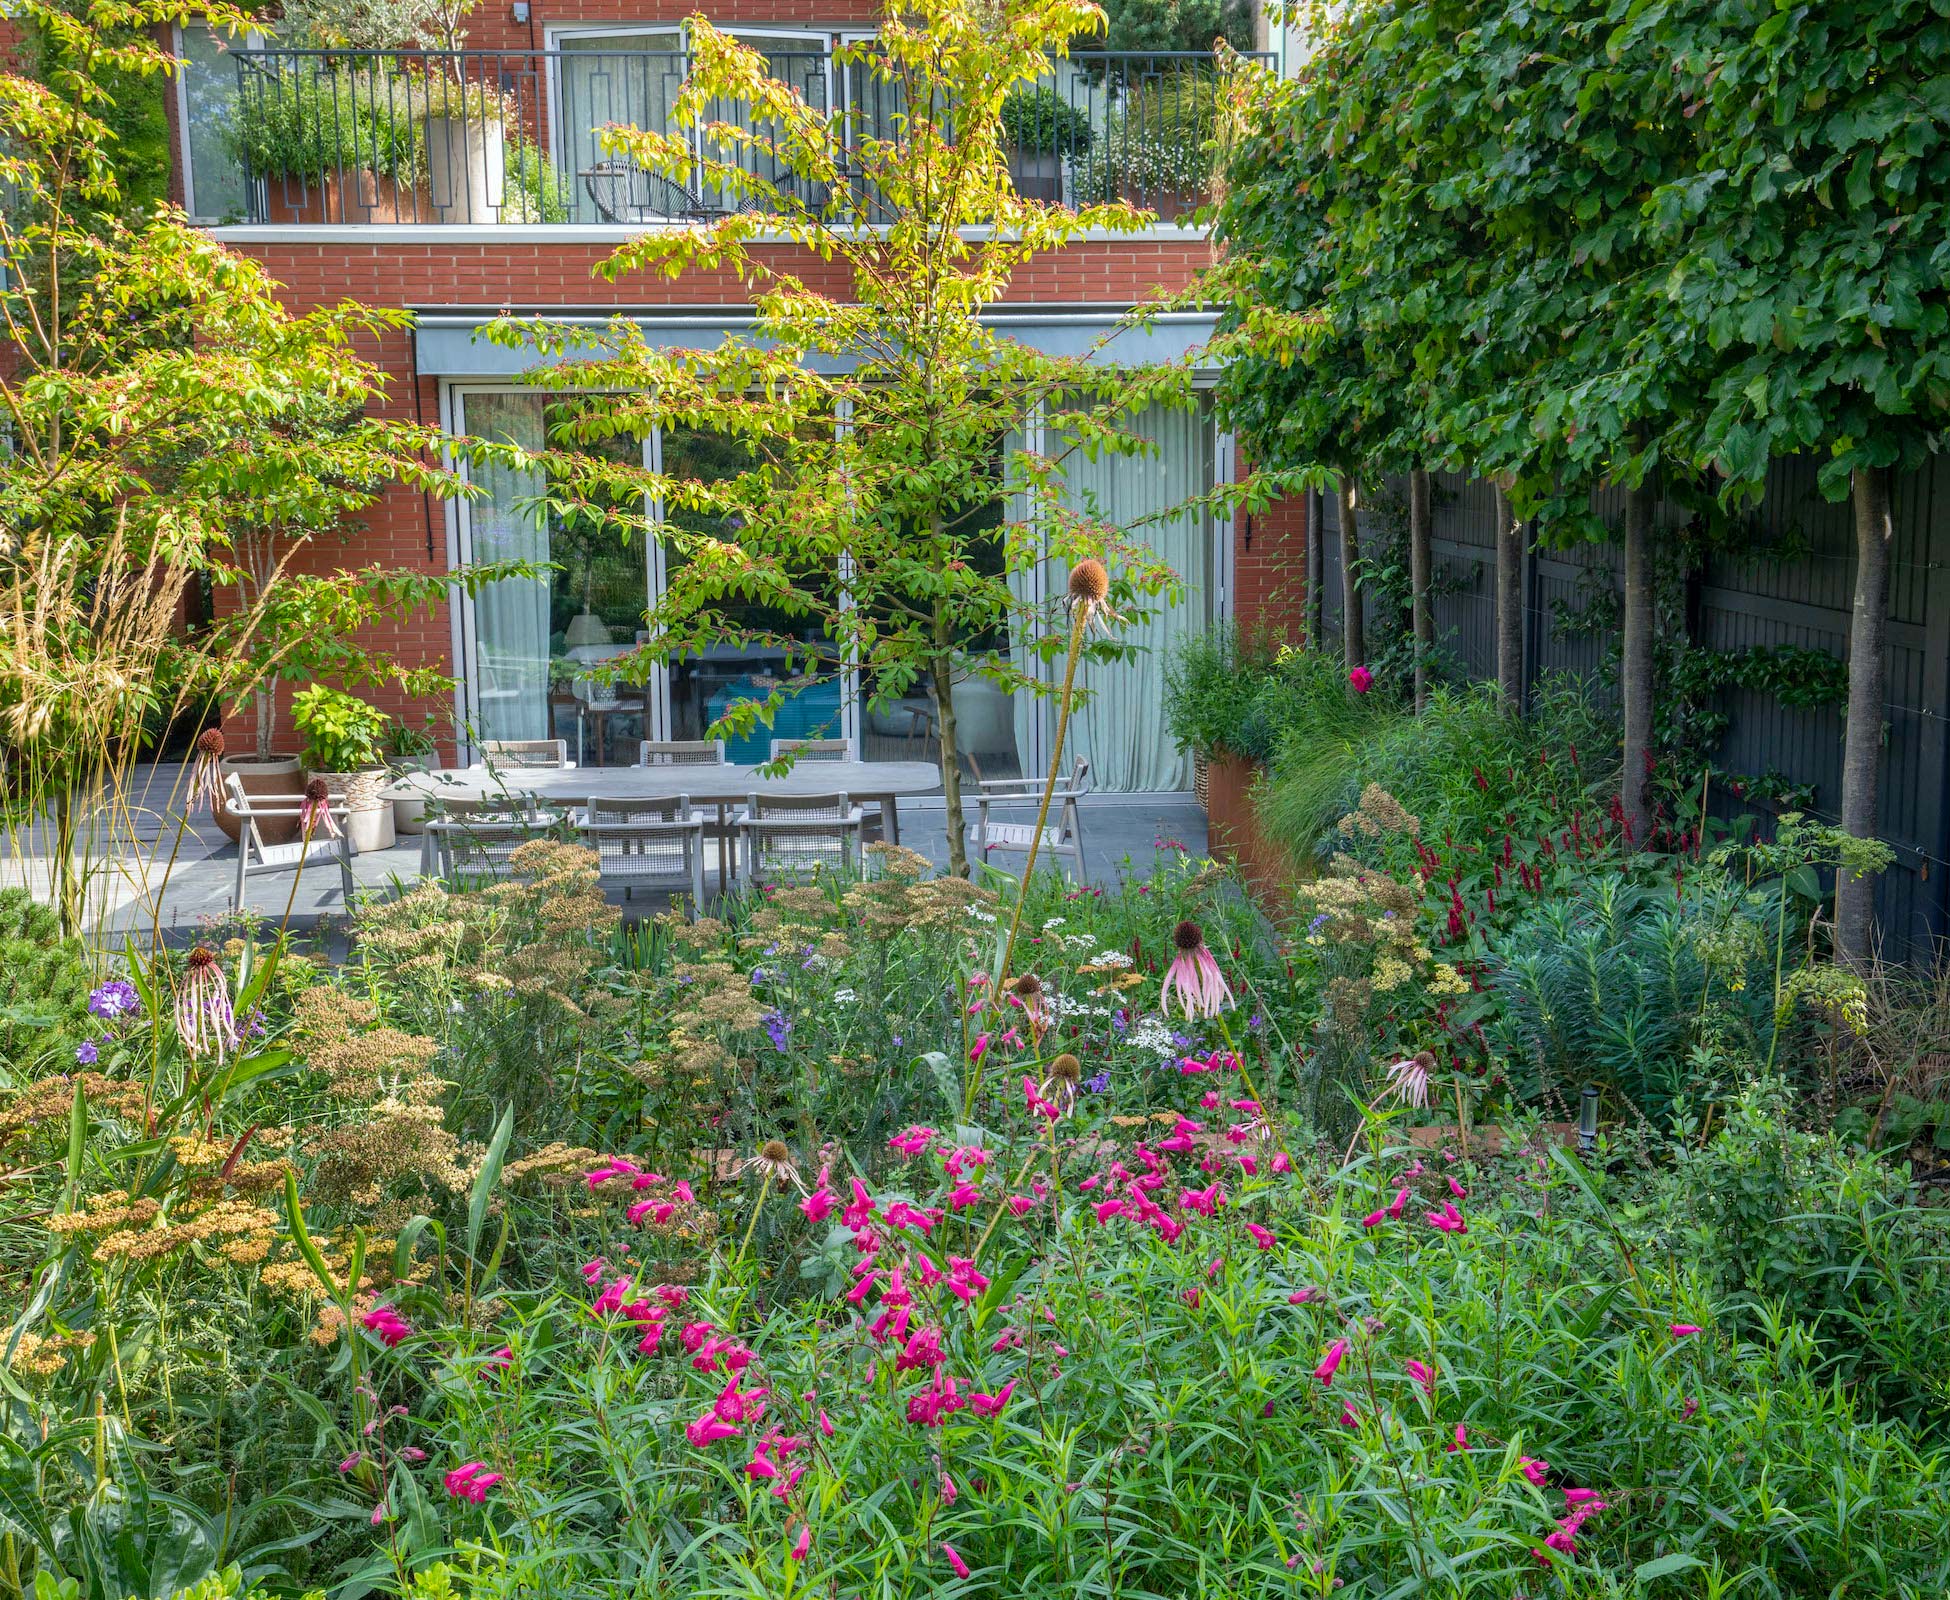 Soft herbaceous planting surrounds the lower dining area